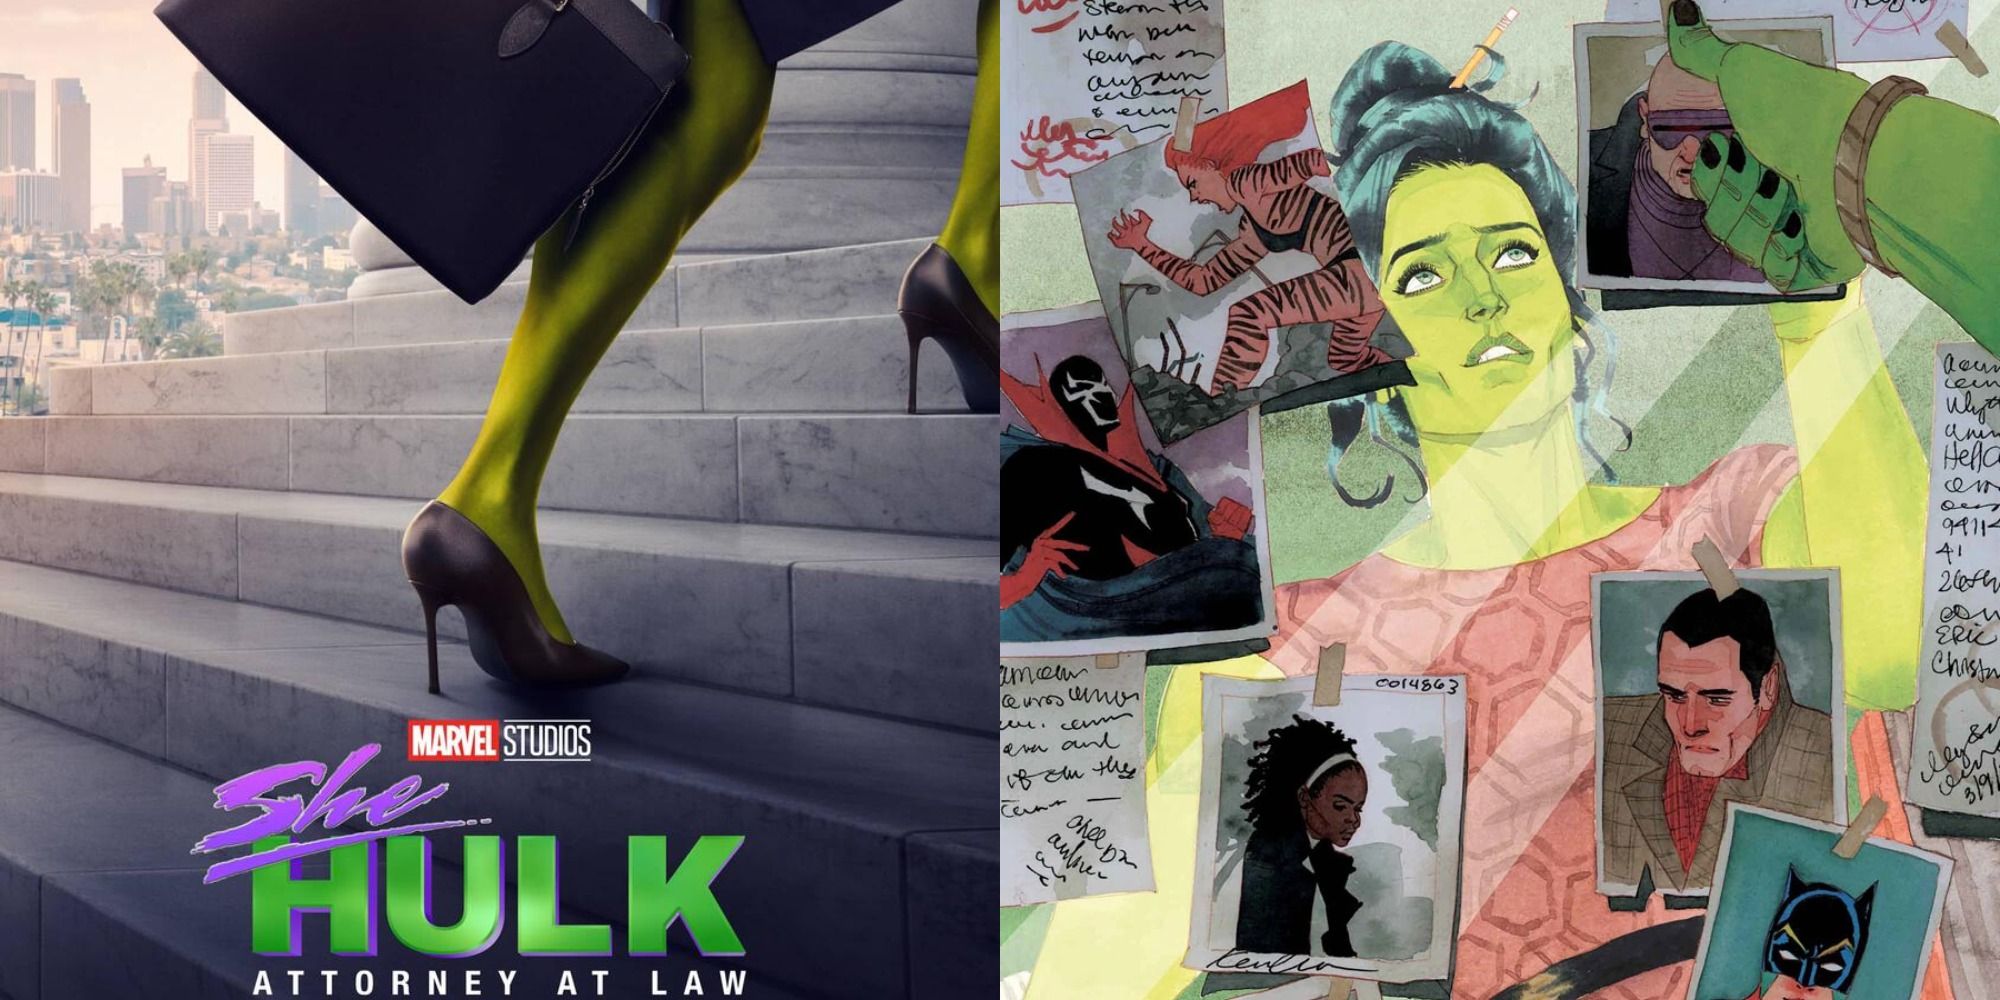 Split image showing the poster for She-Hulk and a panel from the comics.